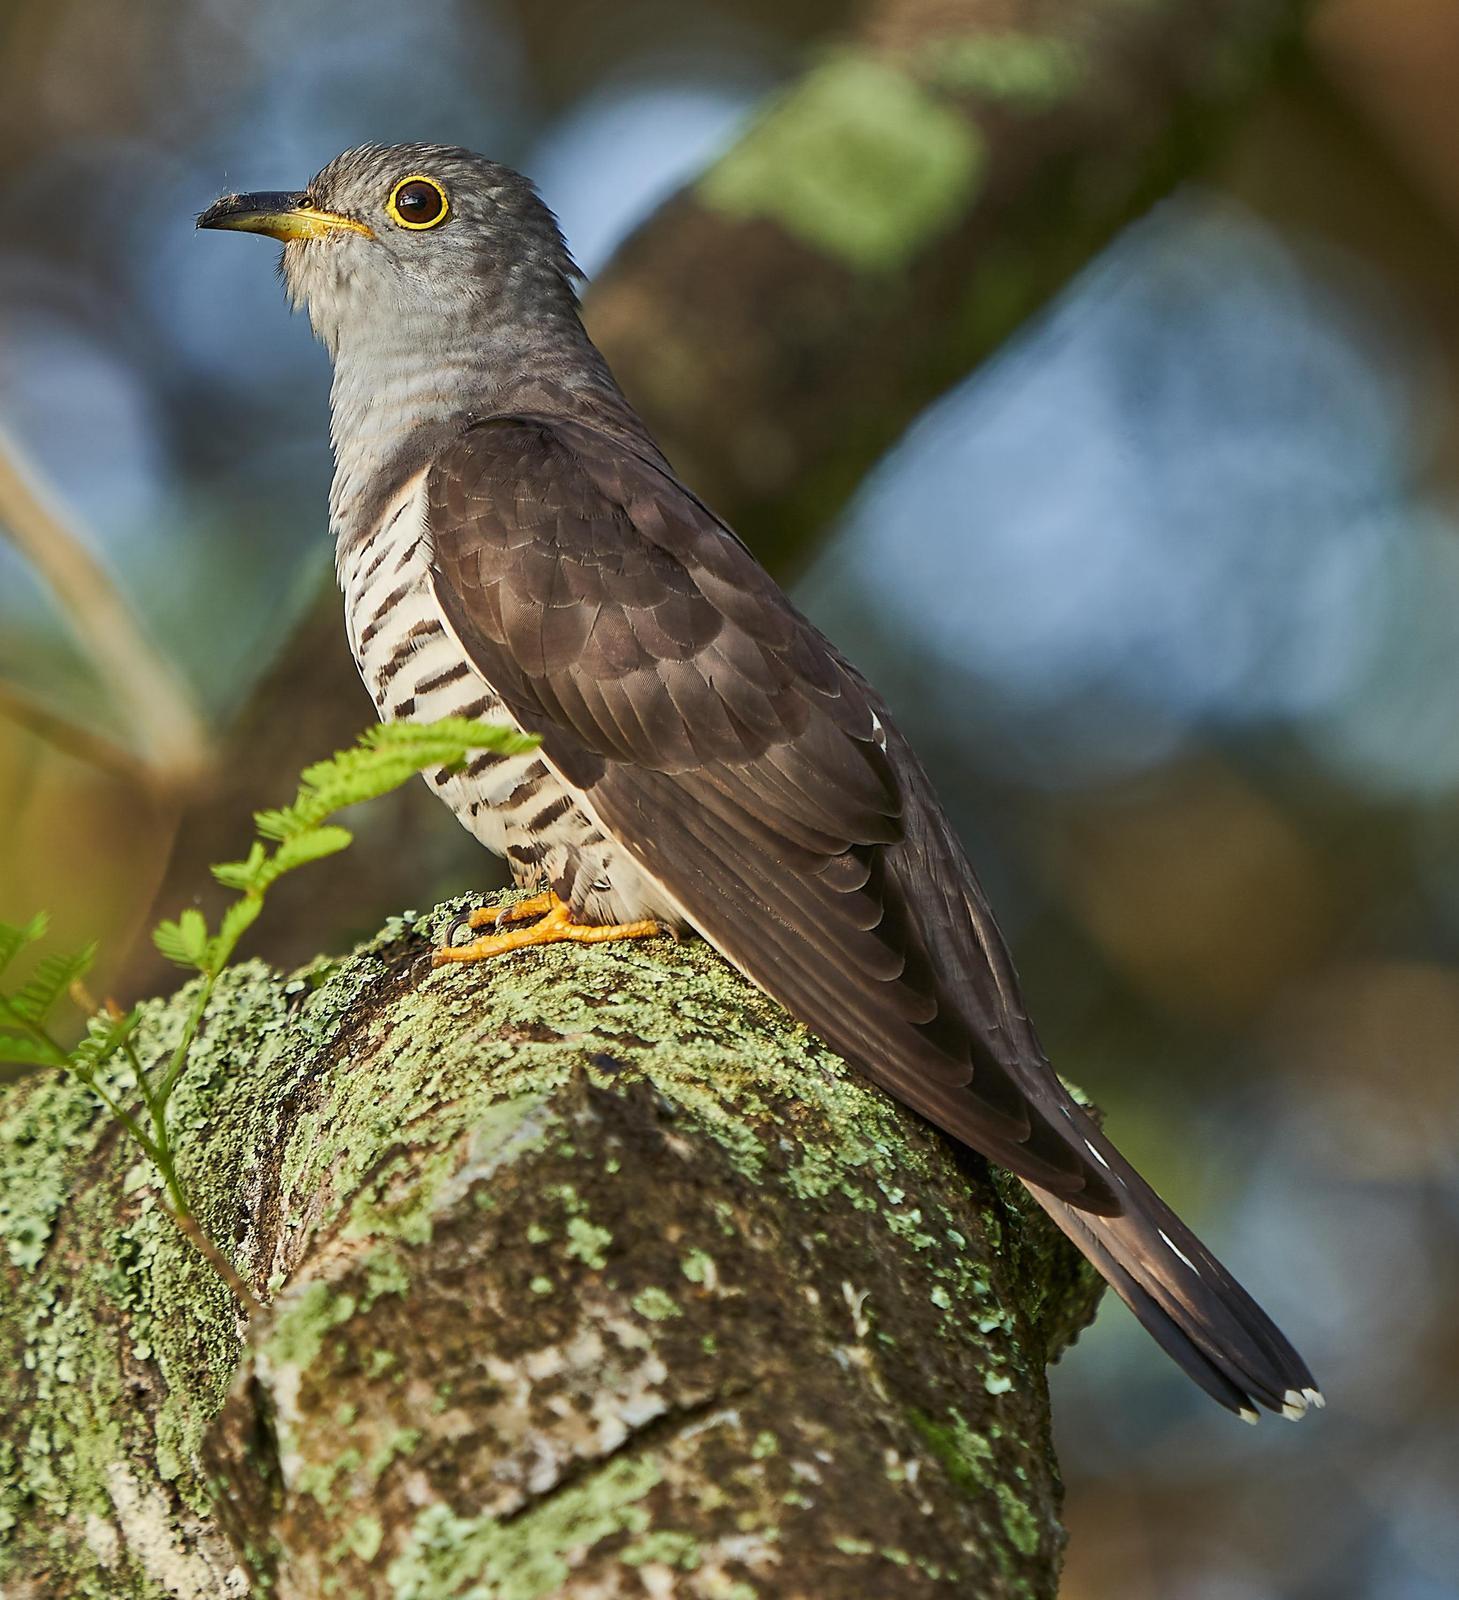 Indian Cuckoo Photo by Steven Cheong